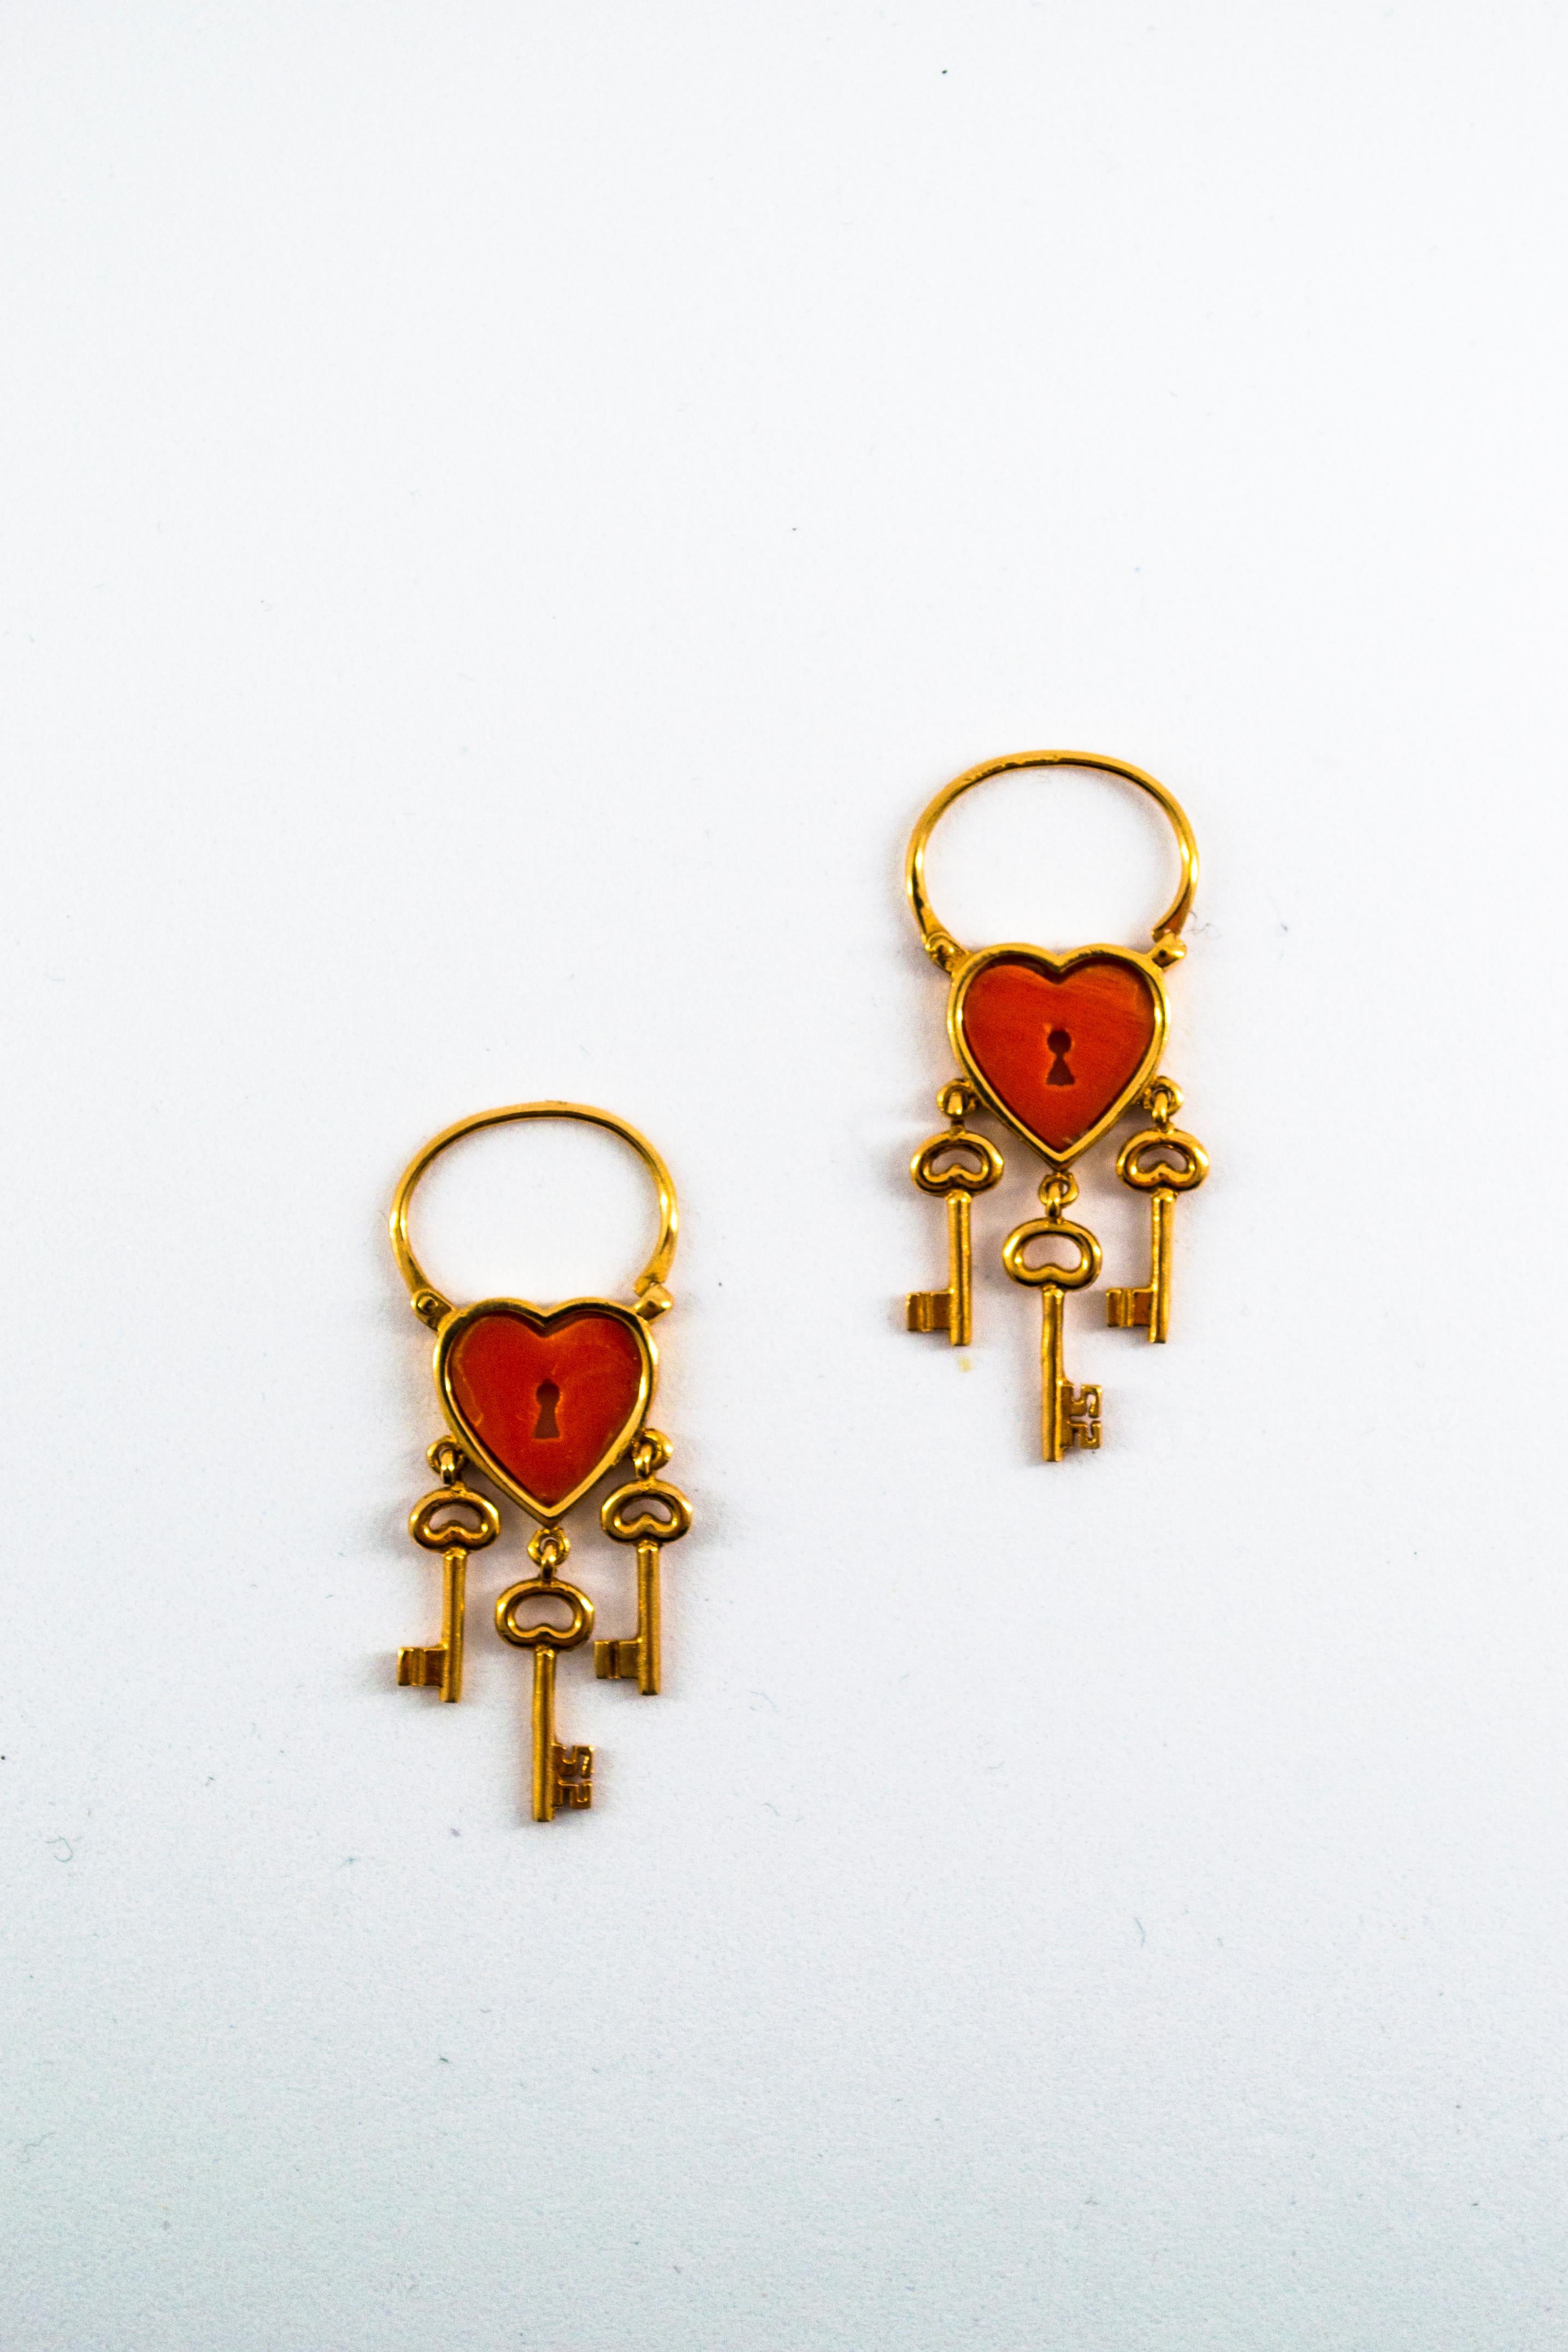 These Earrings are made of 14K Yellow Gold.
These Earrings have Mediterranean (Sardinia, Italy) Red Coral.
All our Earrings have pins for pierced ears but we can change the closure and make any of our Earrings suitable even for non-pierced